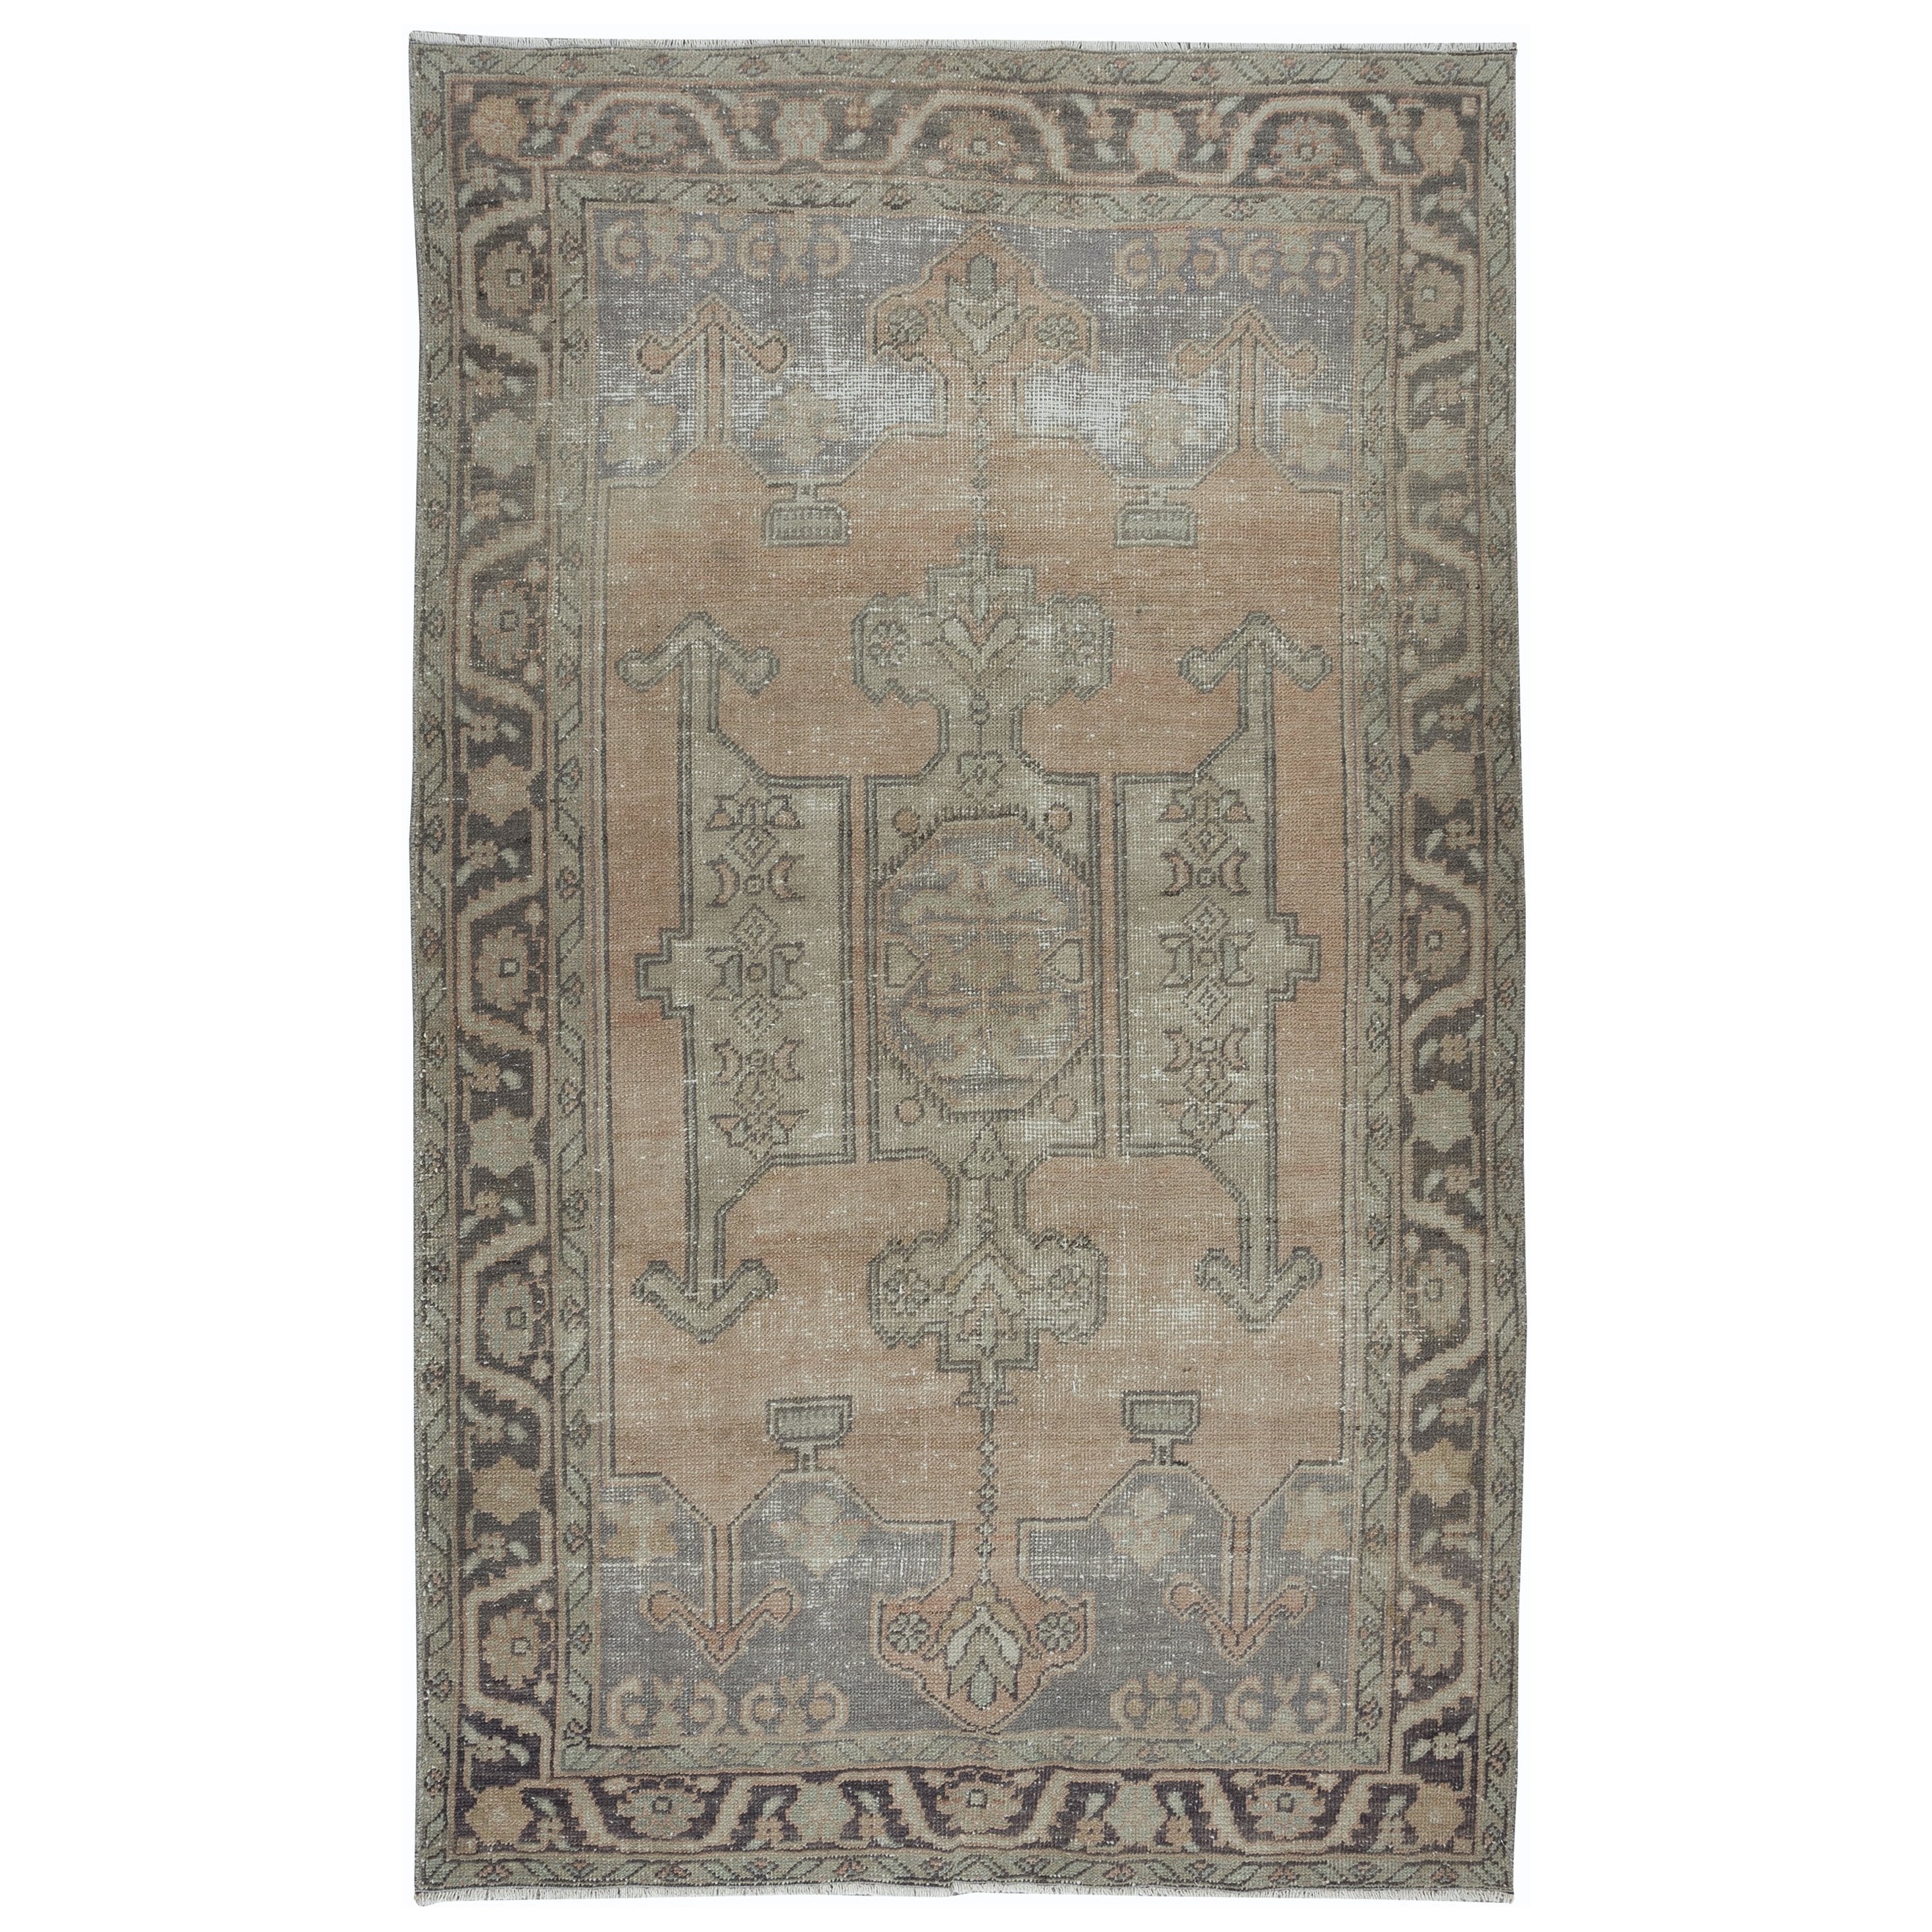 5x8.3 Ft Vintage Handmade Rug in Muted Colors, Anatolian Geometric Wool Carpet For Sale